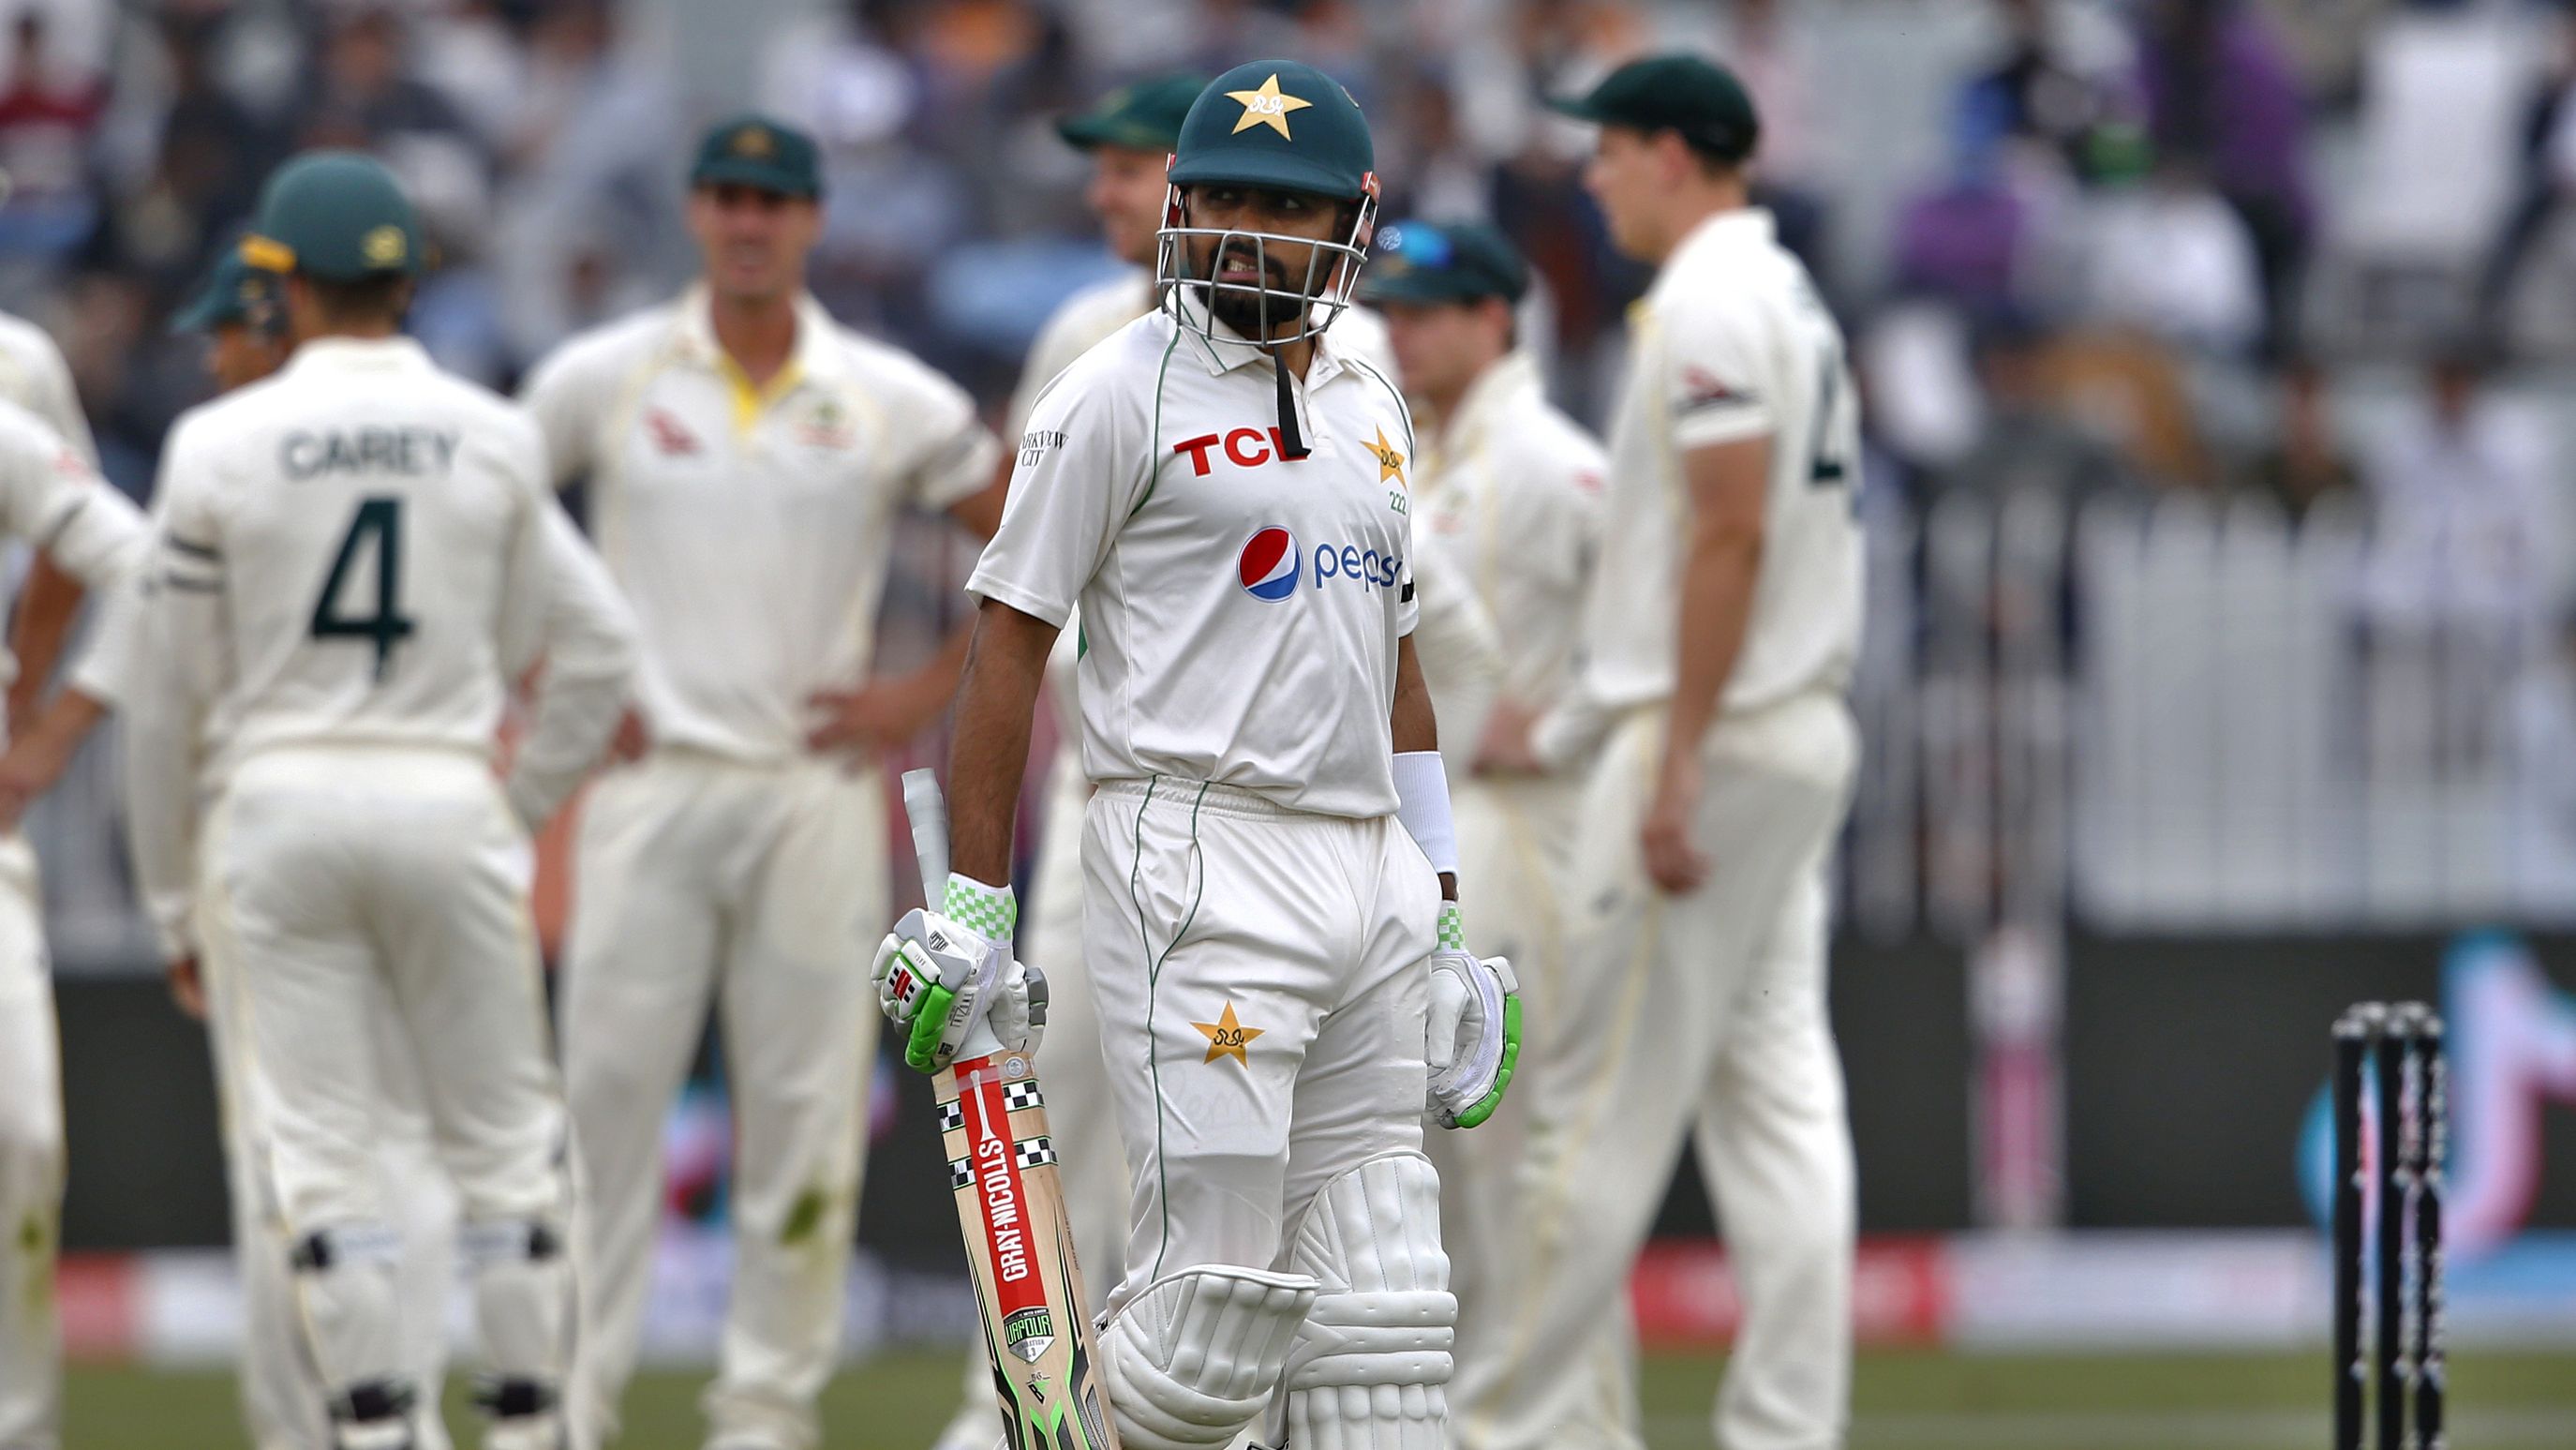 Pakistans Babar Azam reacts as he walks back to pavilion after his dismissal during the 2nd day of first cricket test match between Pakistan and Australia at the Pindi Stadium.